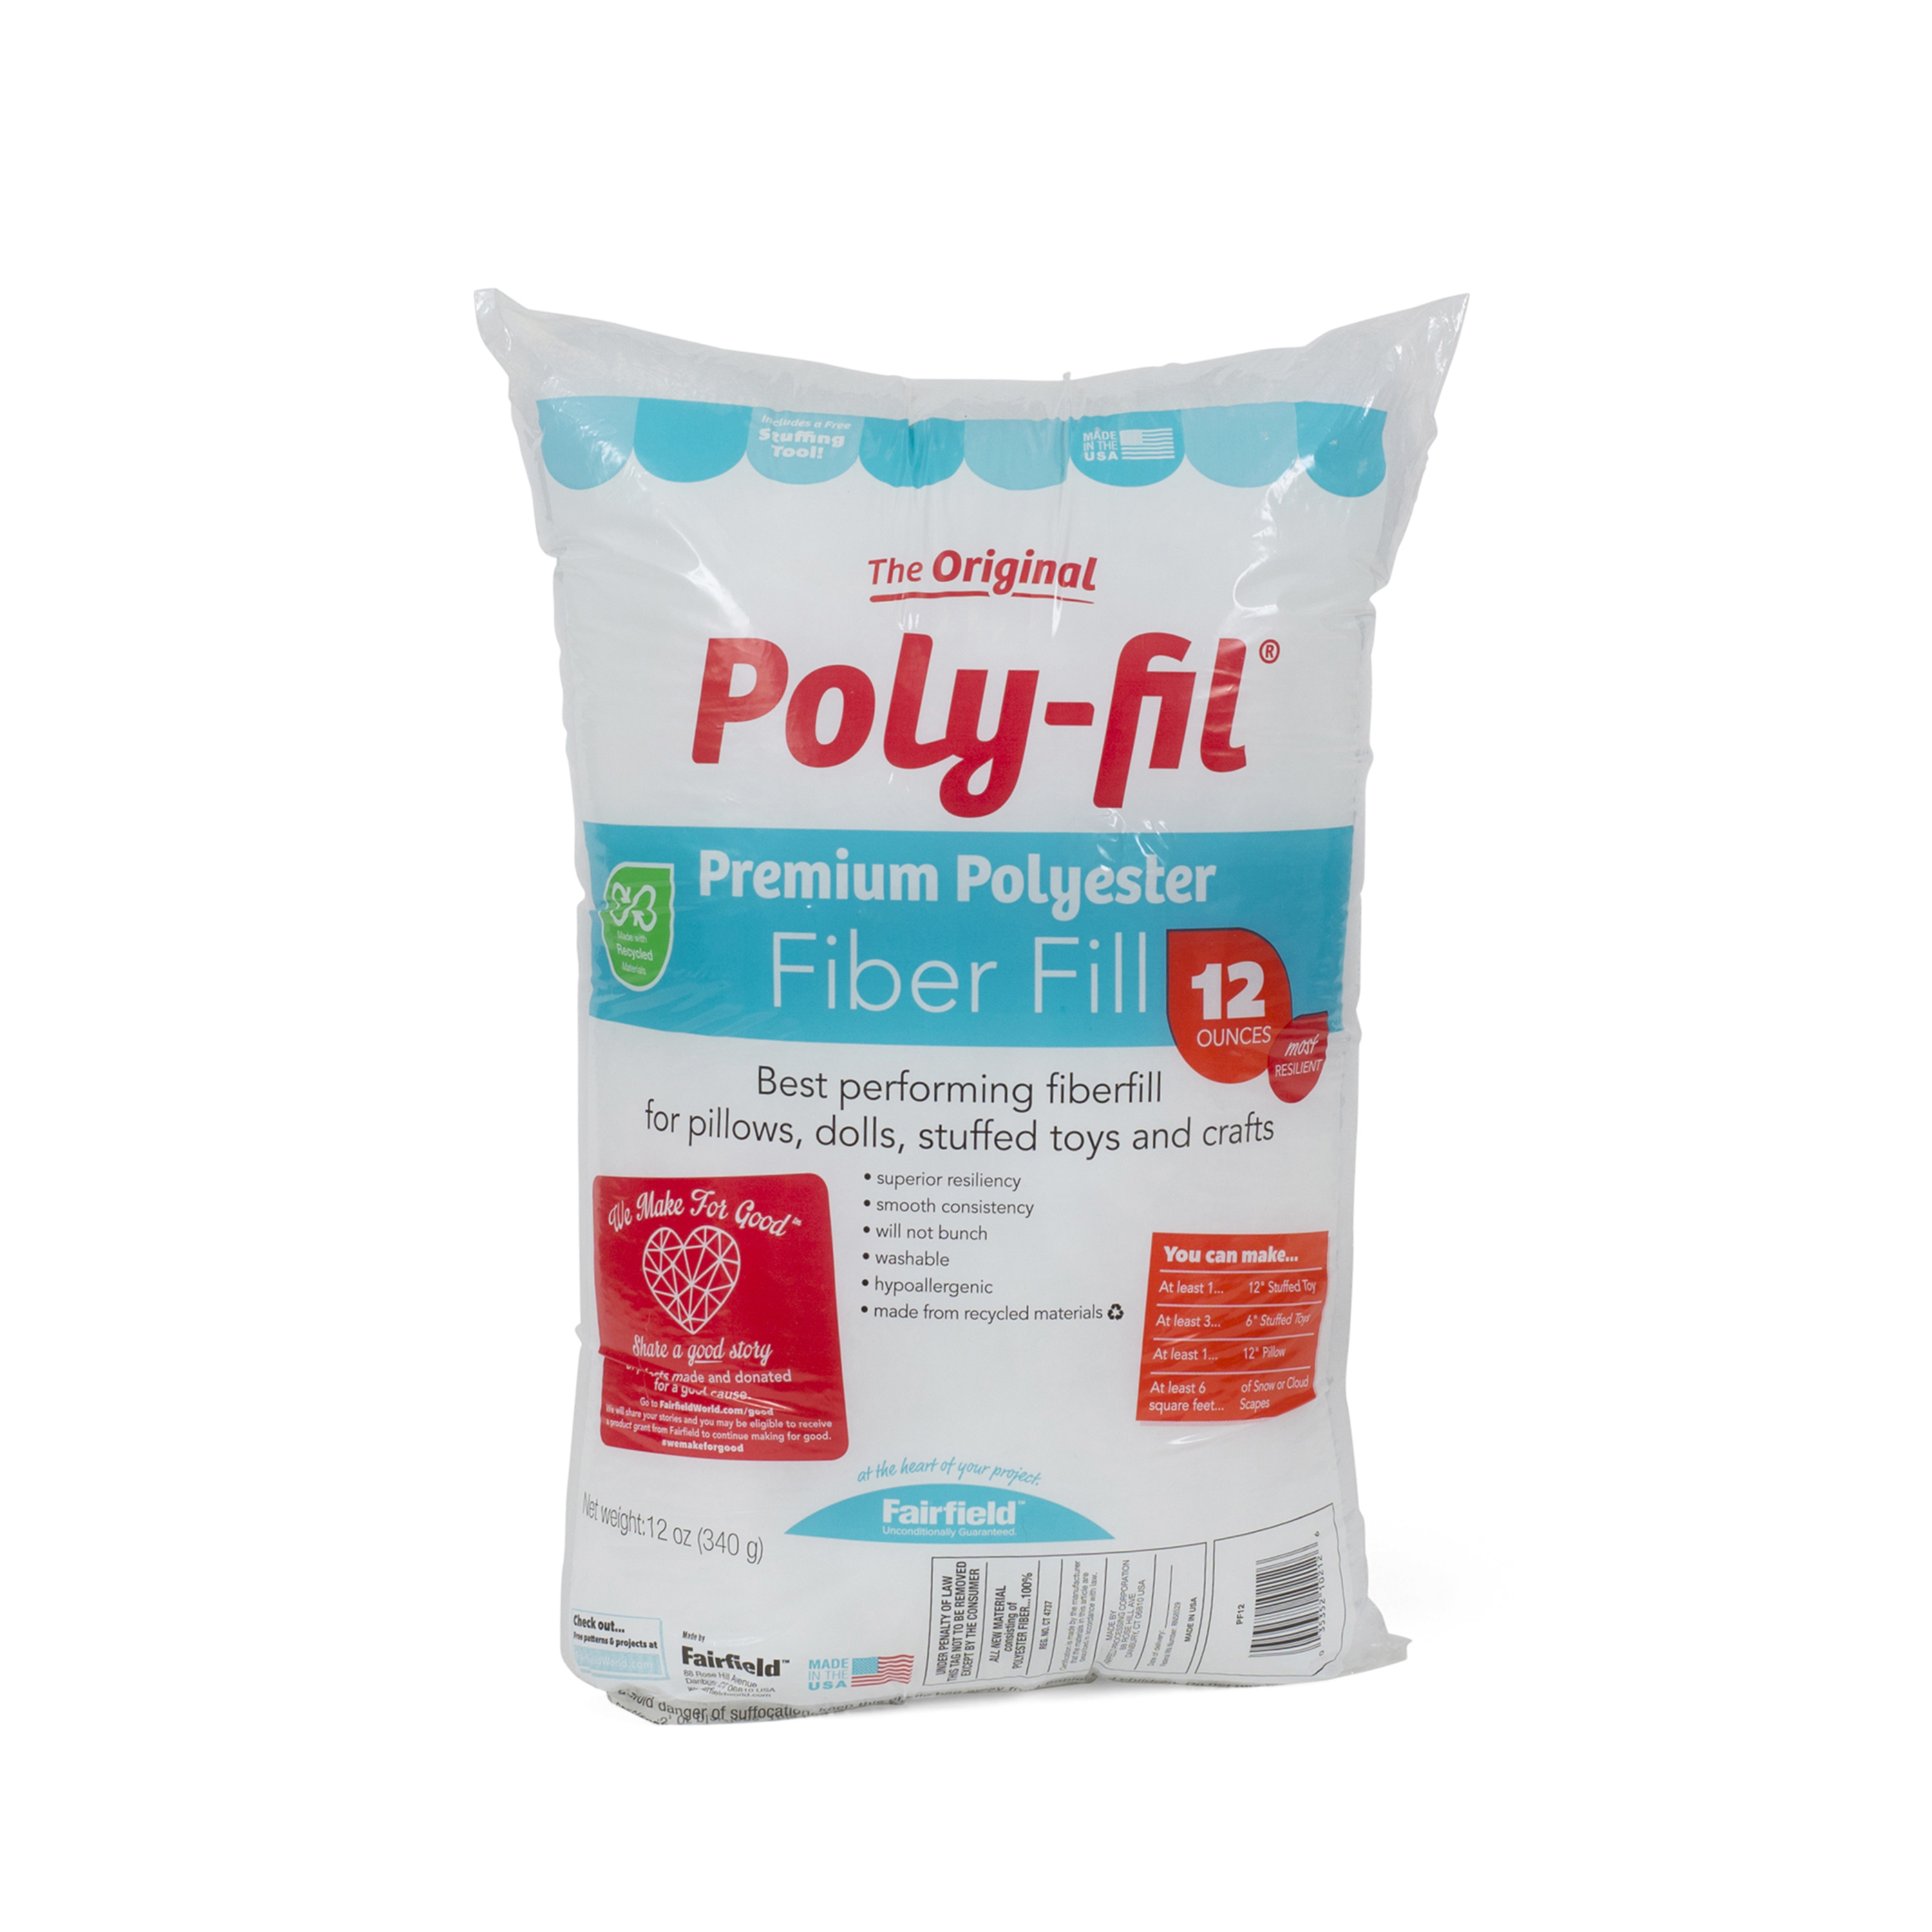 Poly-Fil Premium Polyester Fiberfill for Crafts, 12 oz. - image 1 of 2